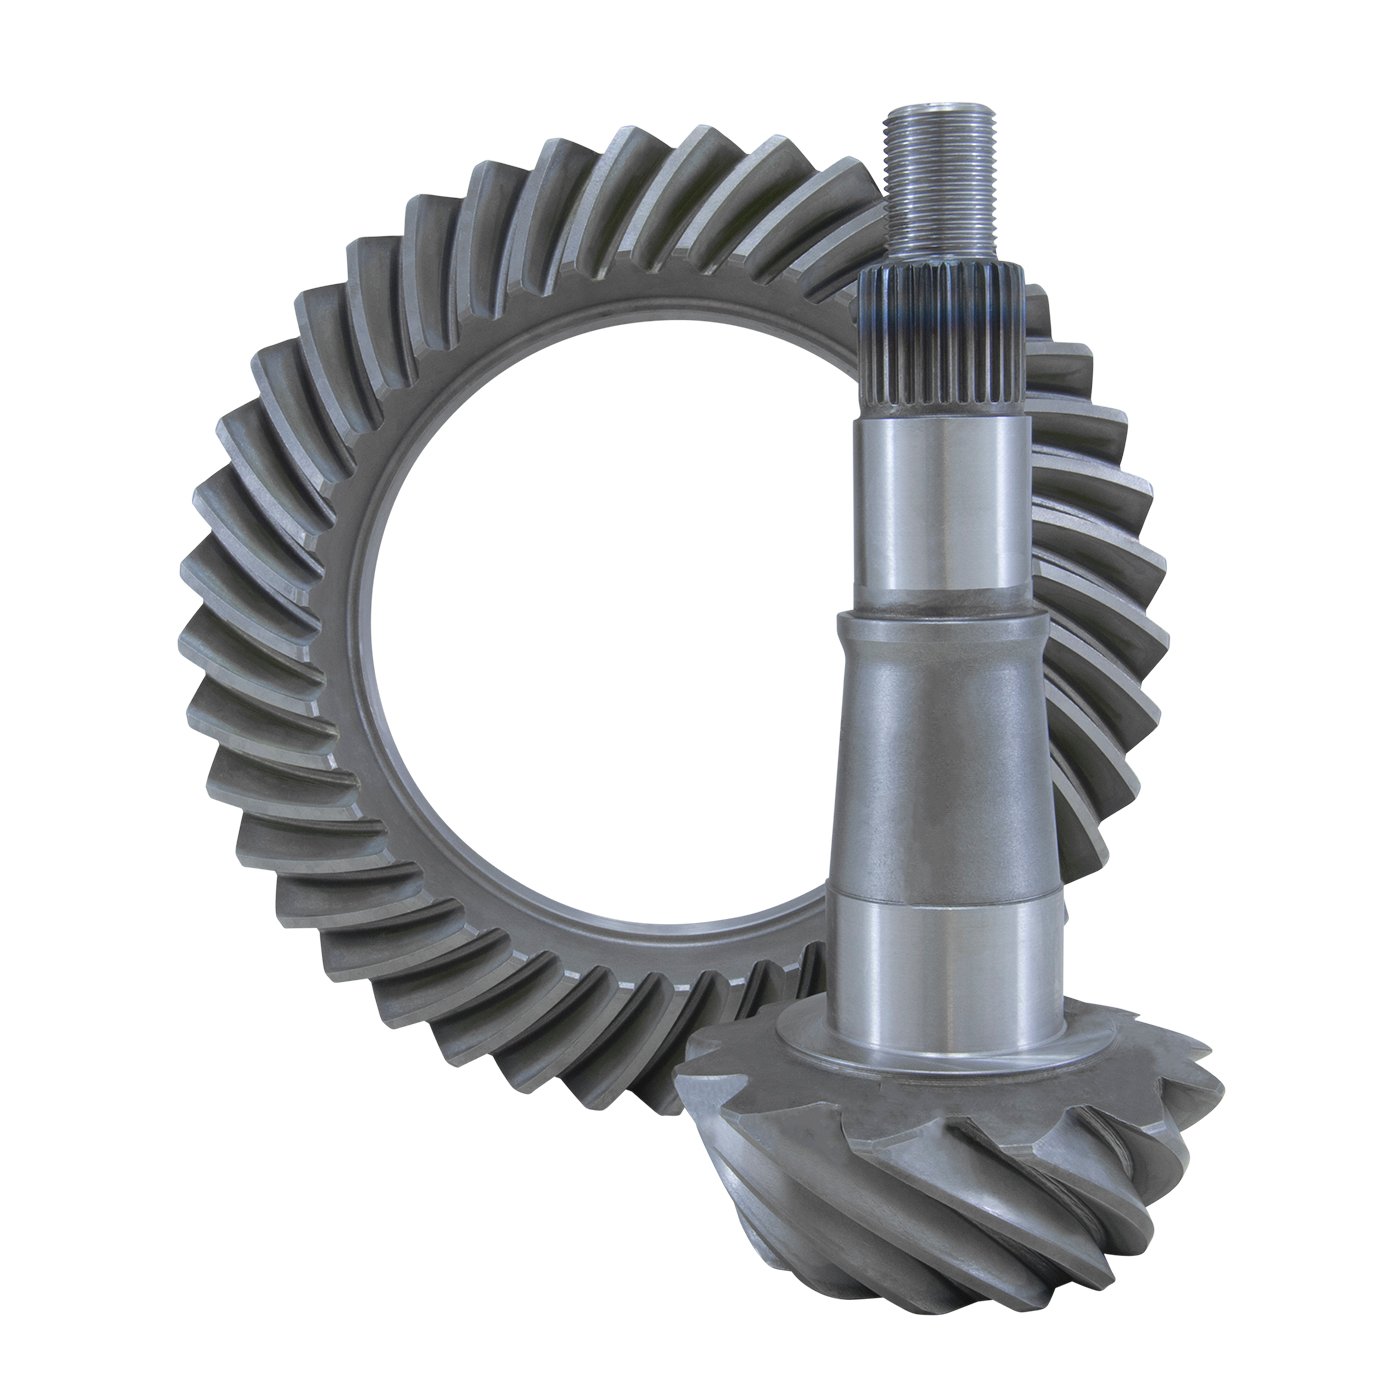 USA Standard ZG GM9.5-456 Ring & Pinion Gear Set, For GM 9.5 in., 4.56 Ratio